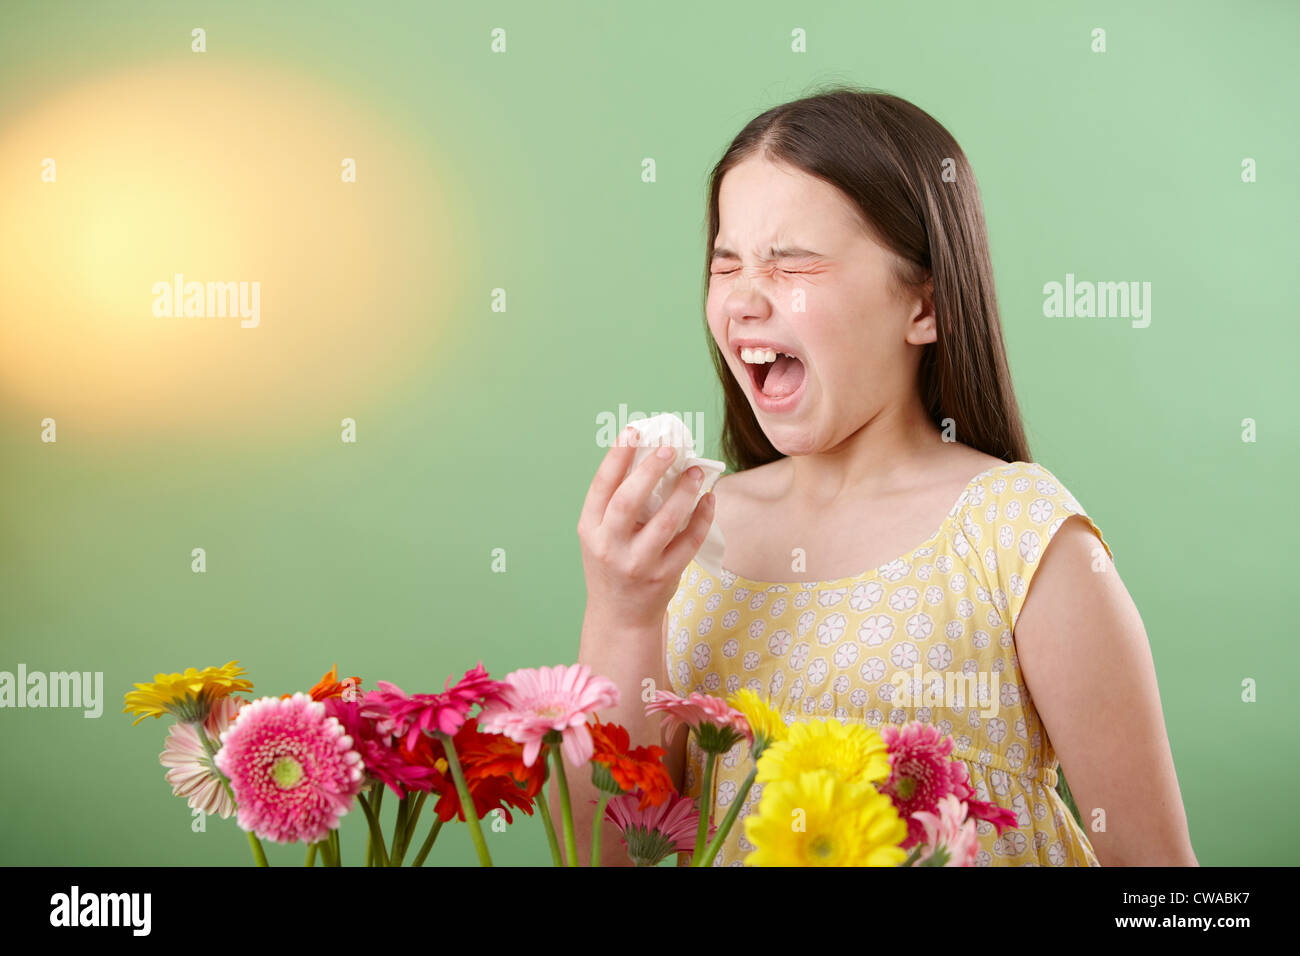 Girl with flowers sneezing Stock Photo